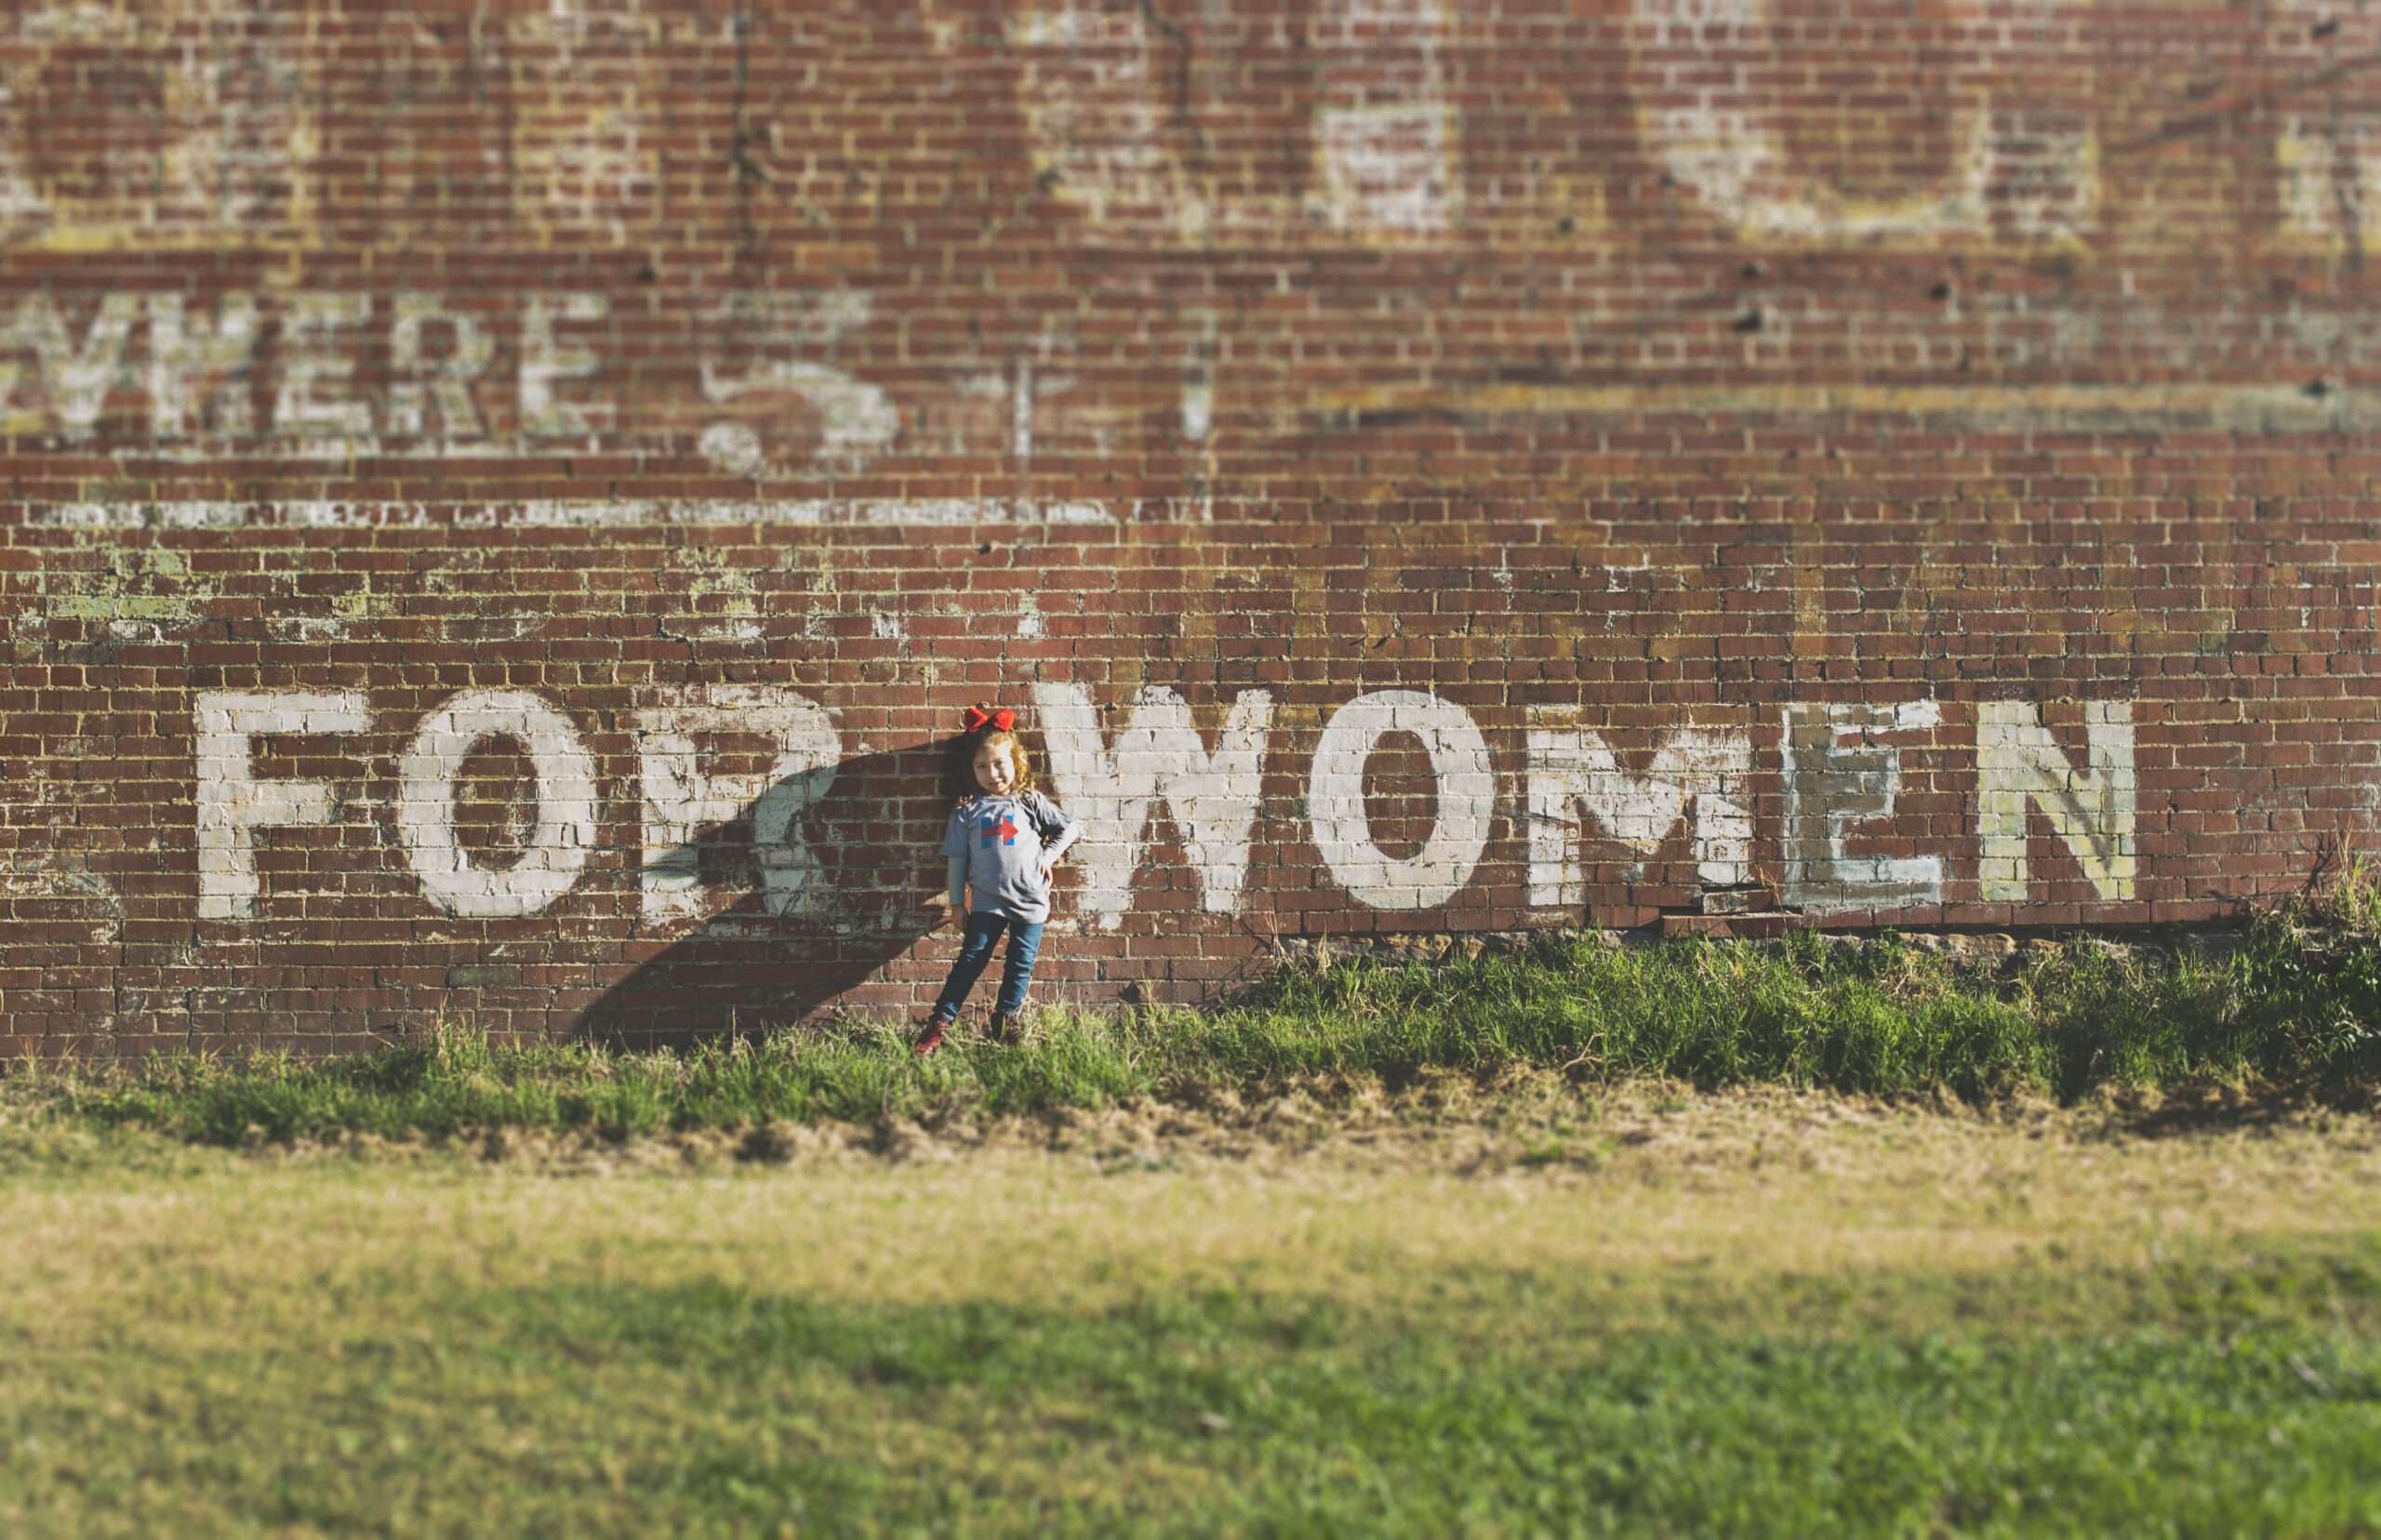 A little girl is standing in front of a brick wall with the words "For Women" painted on it.